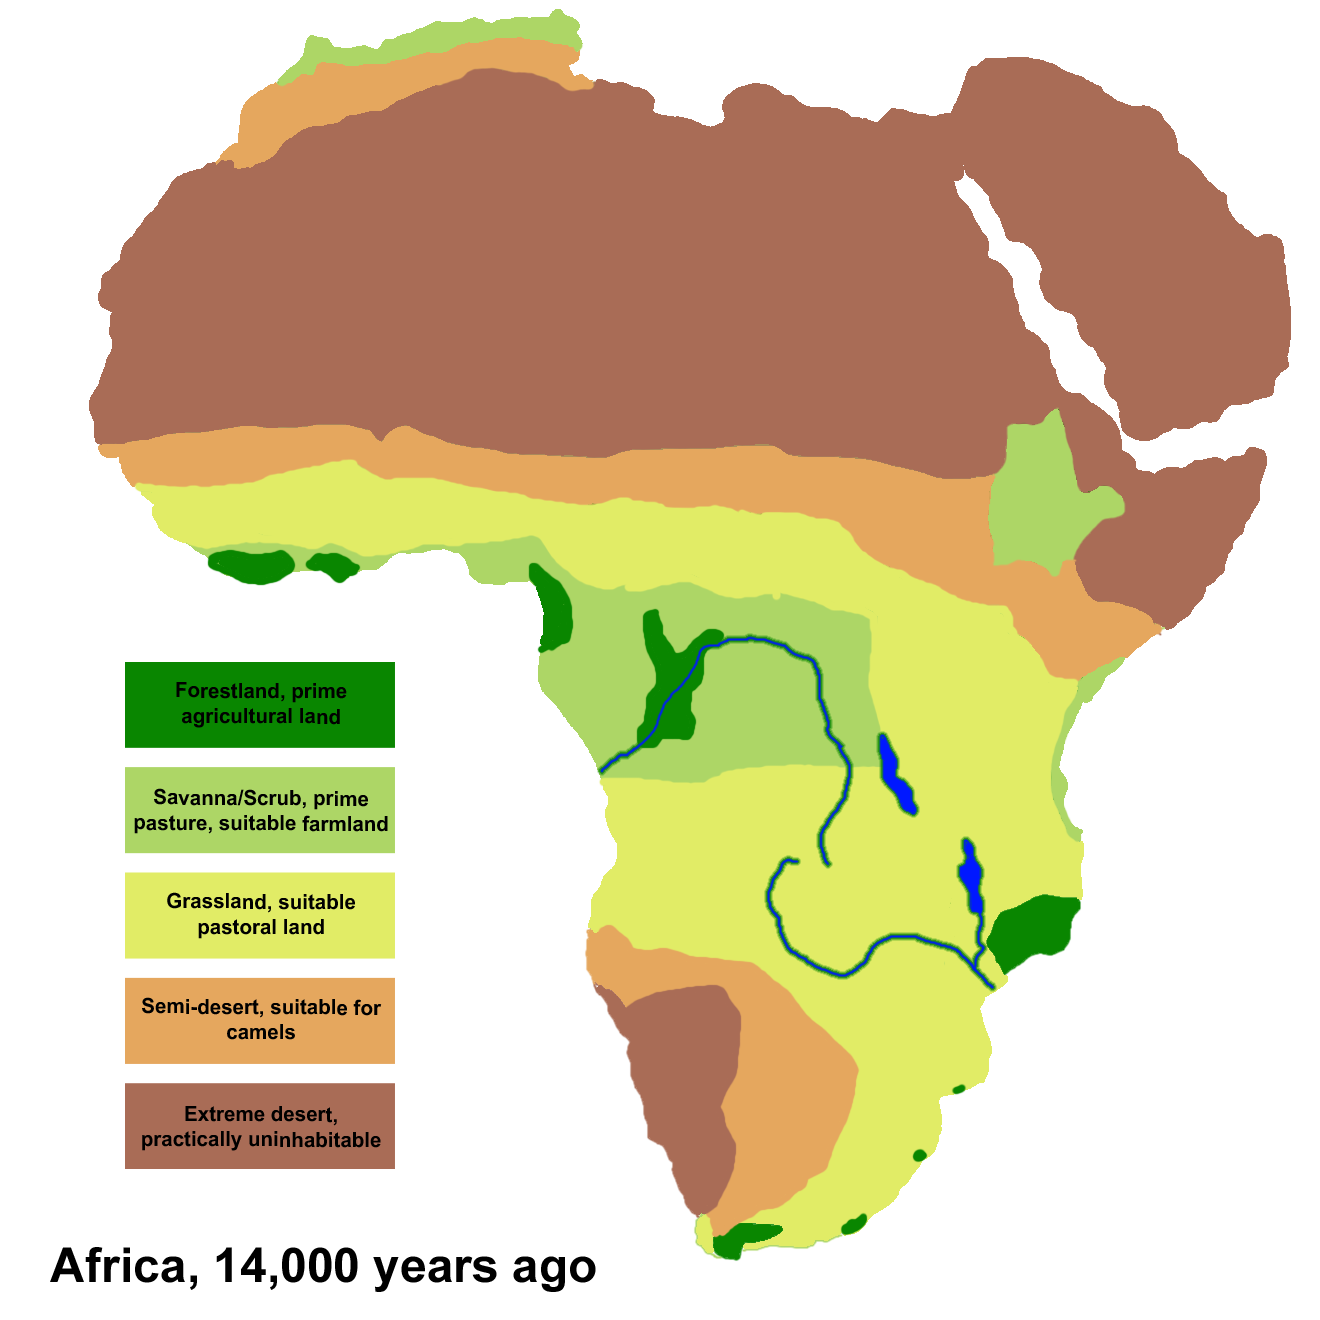 Africa_Climate_14000bp.png